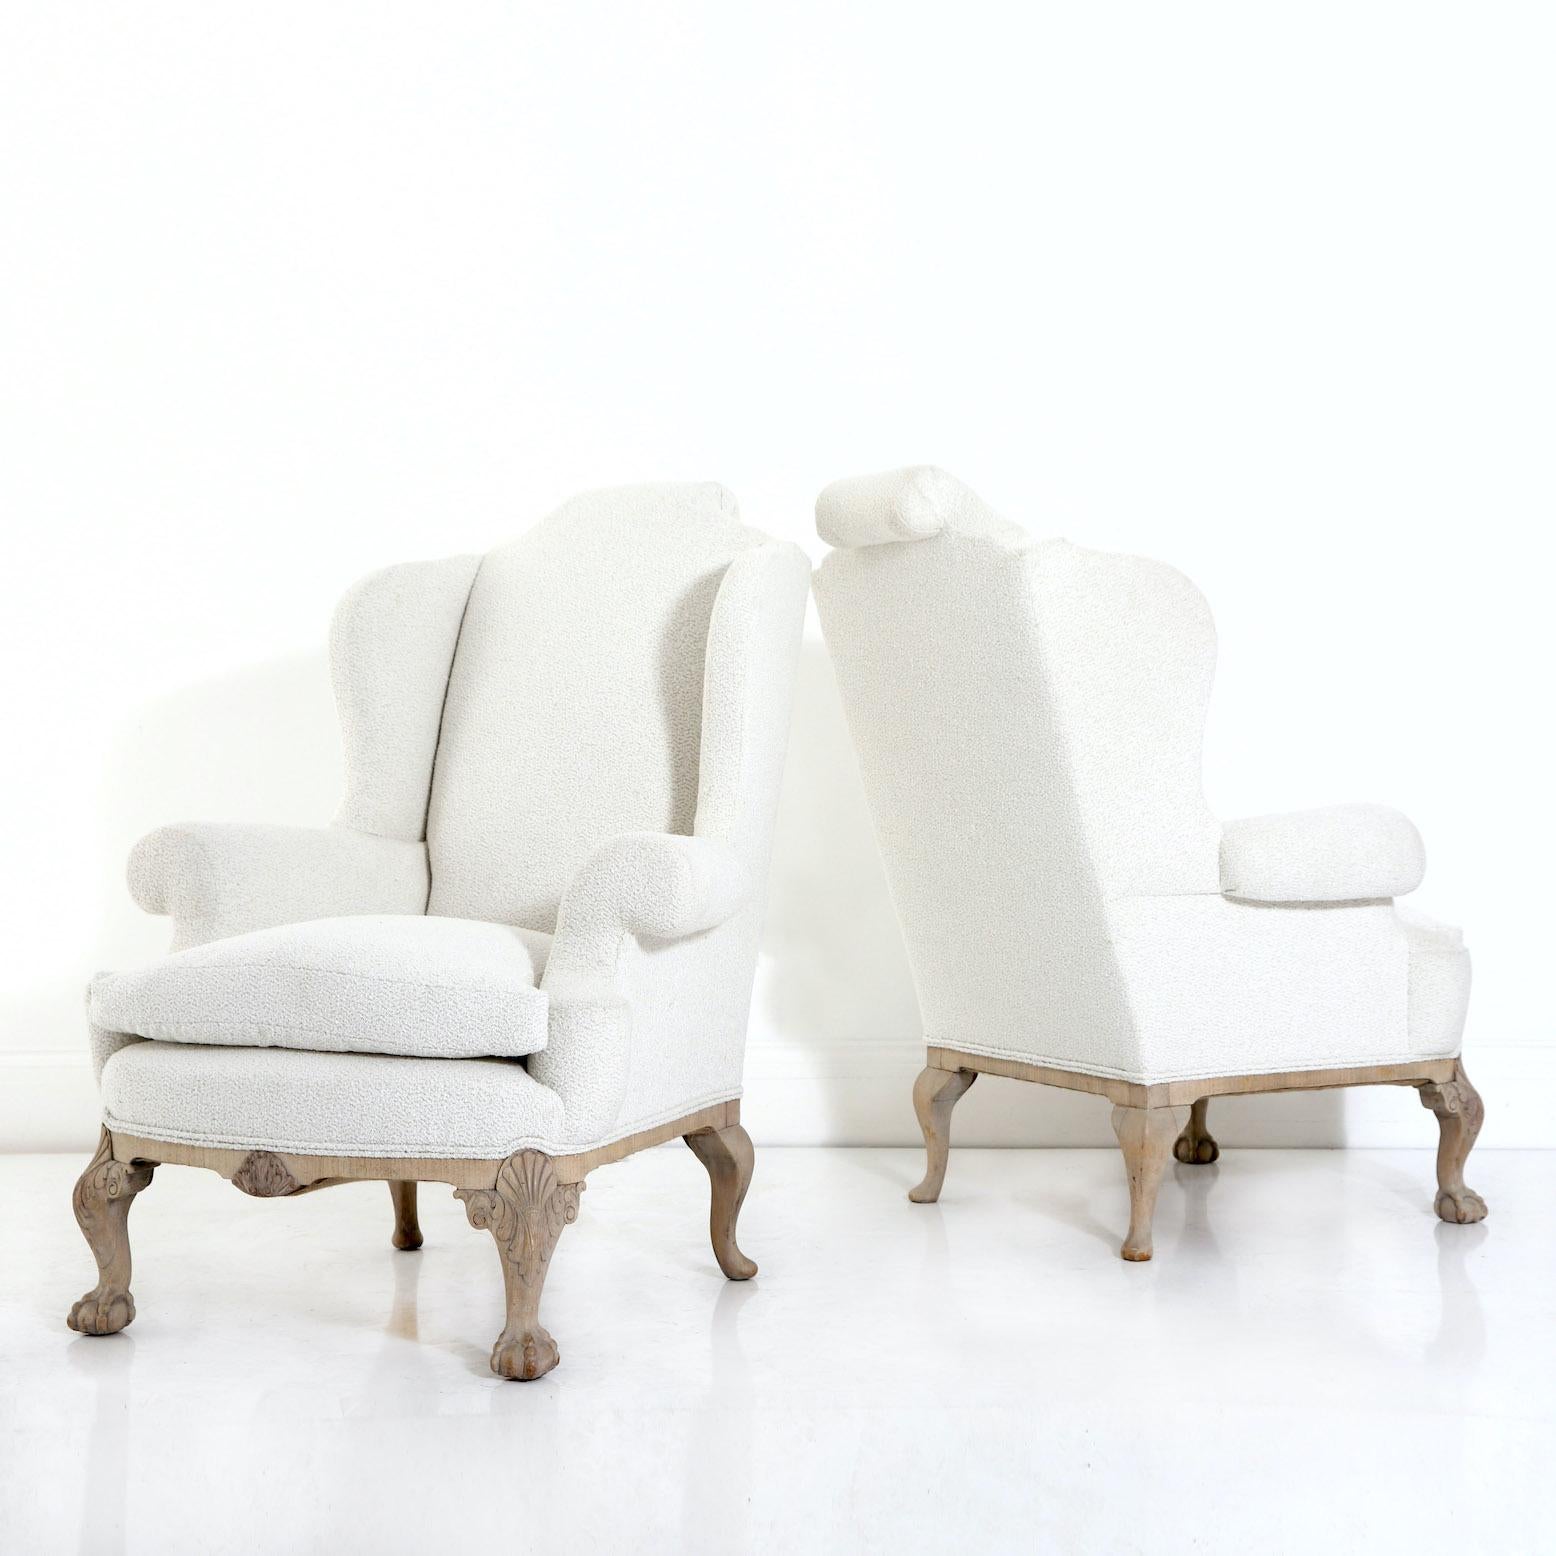 Bleached A Pair of English Wing Chairs